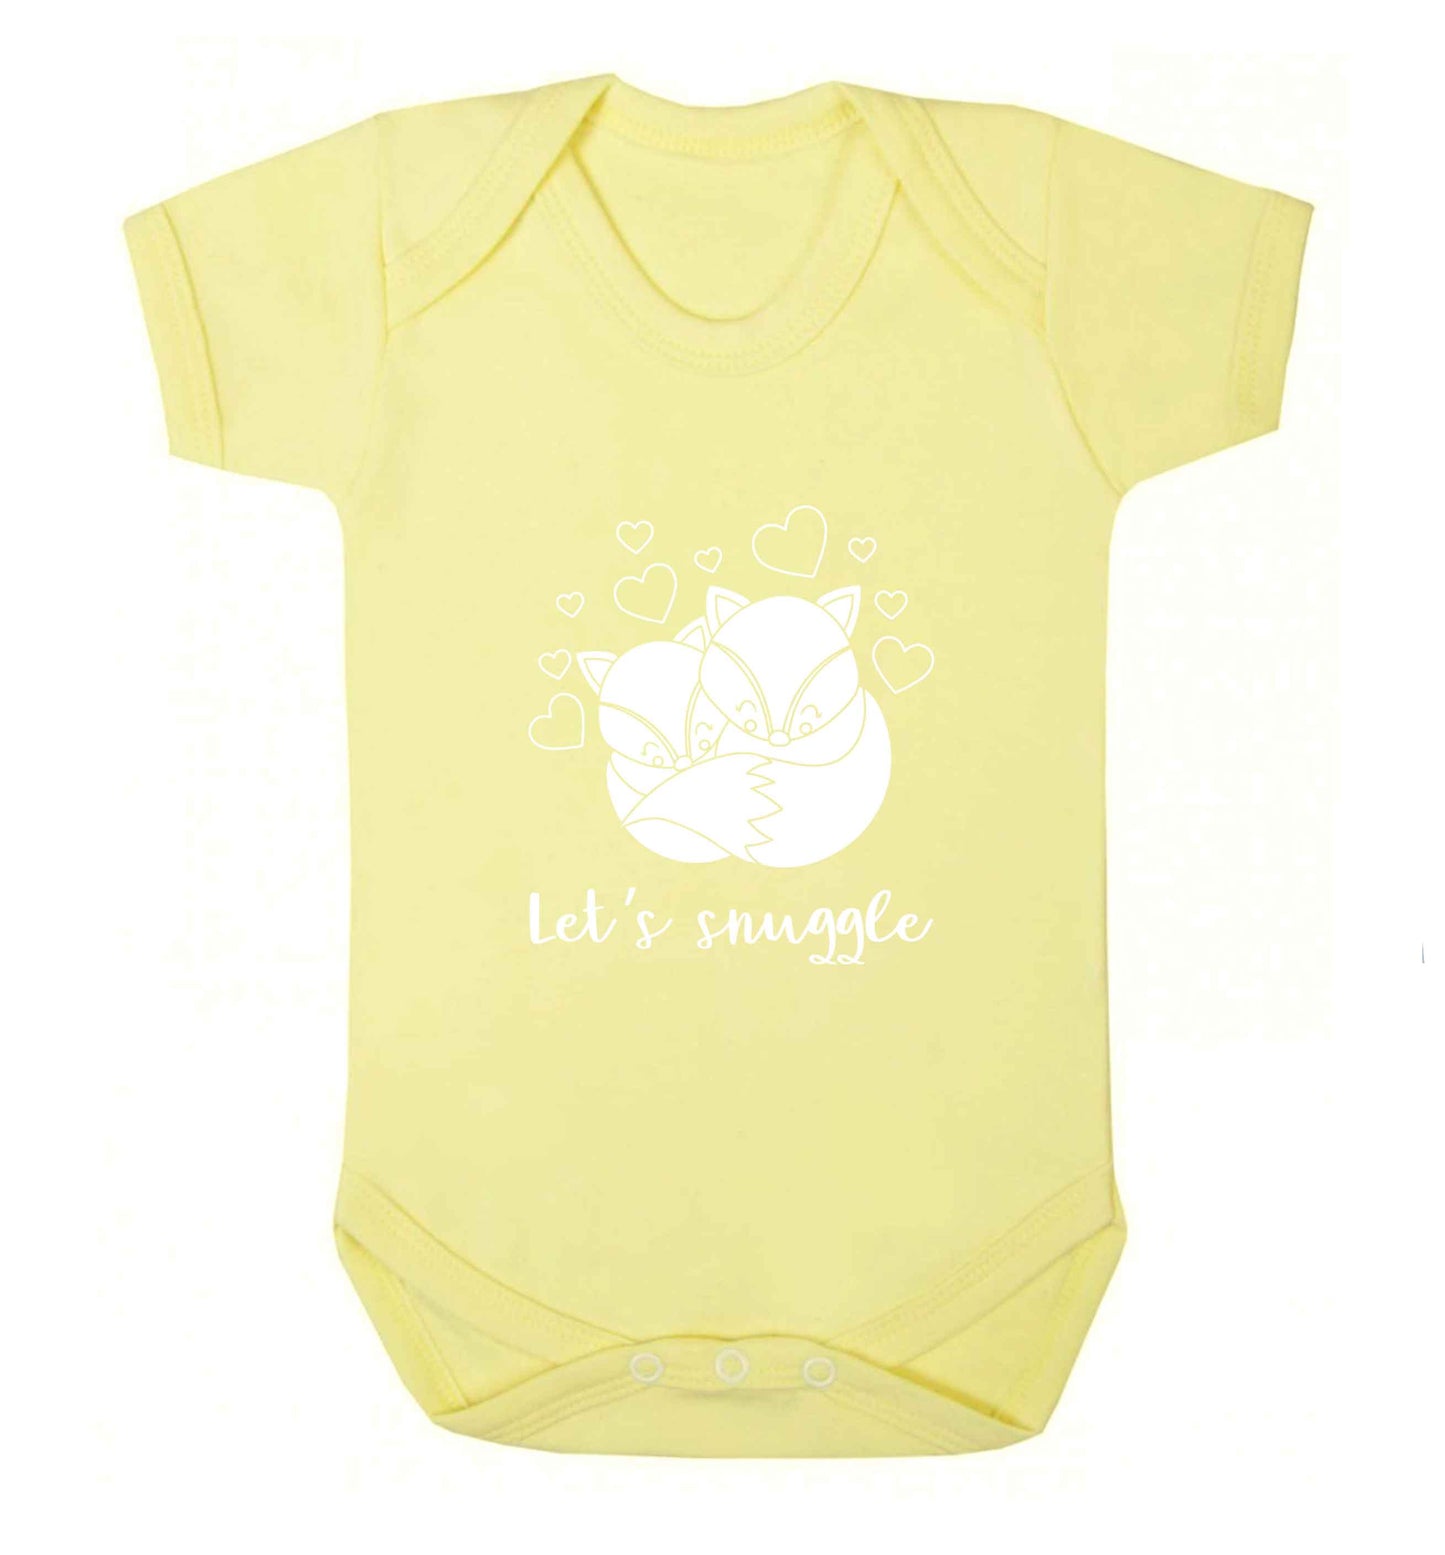 Let's snuggle baby vest pale yellow 18-24 months